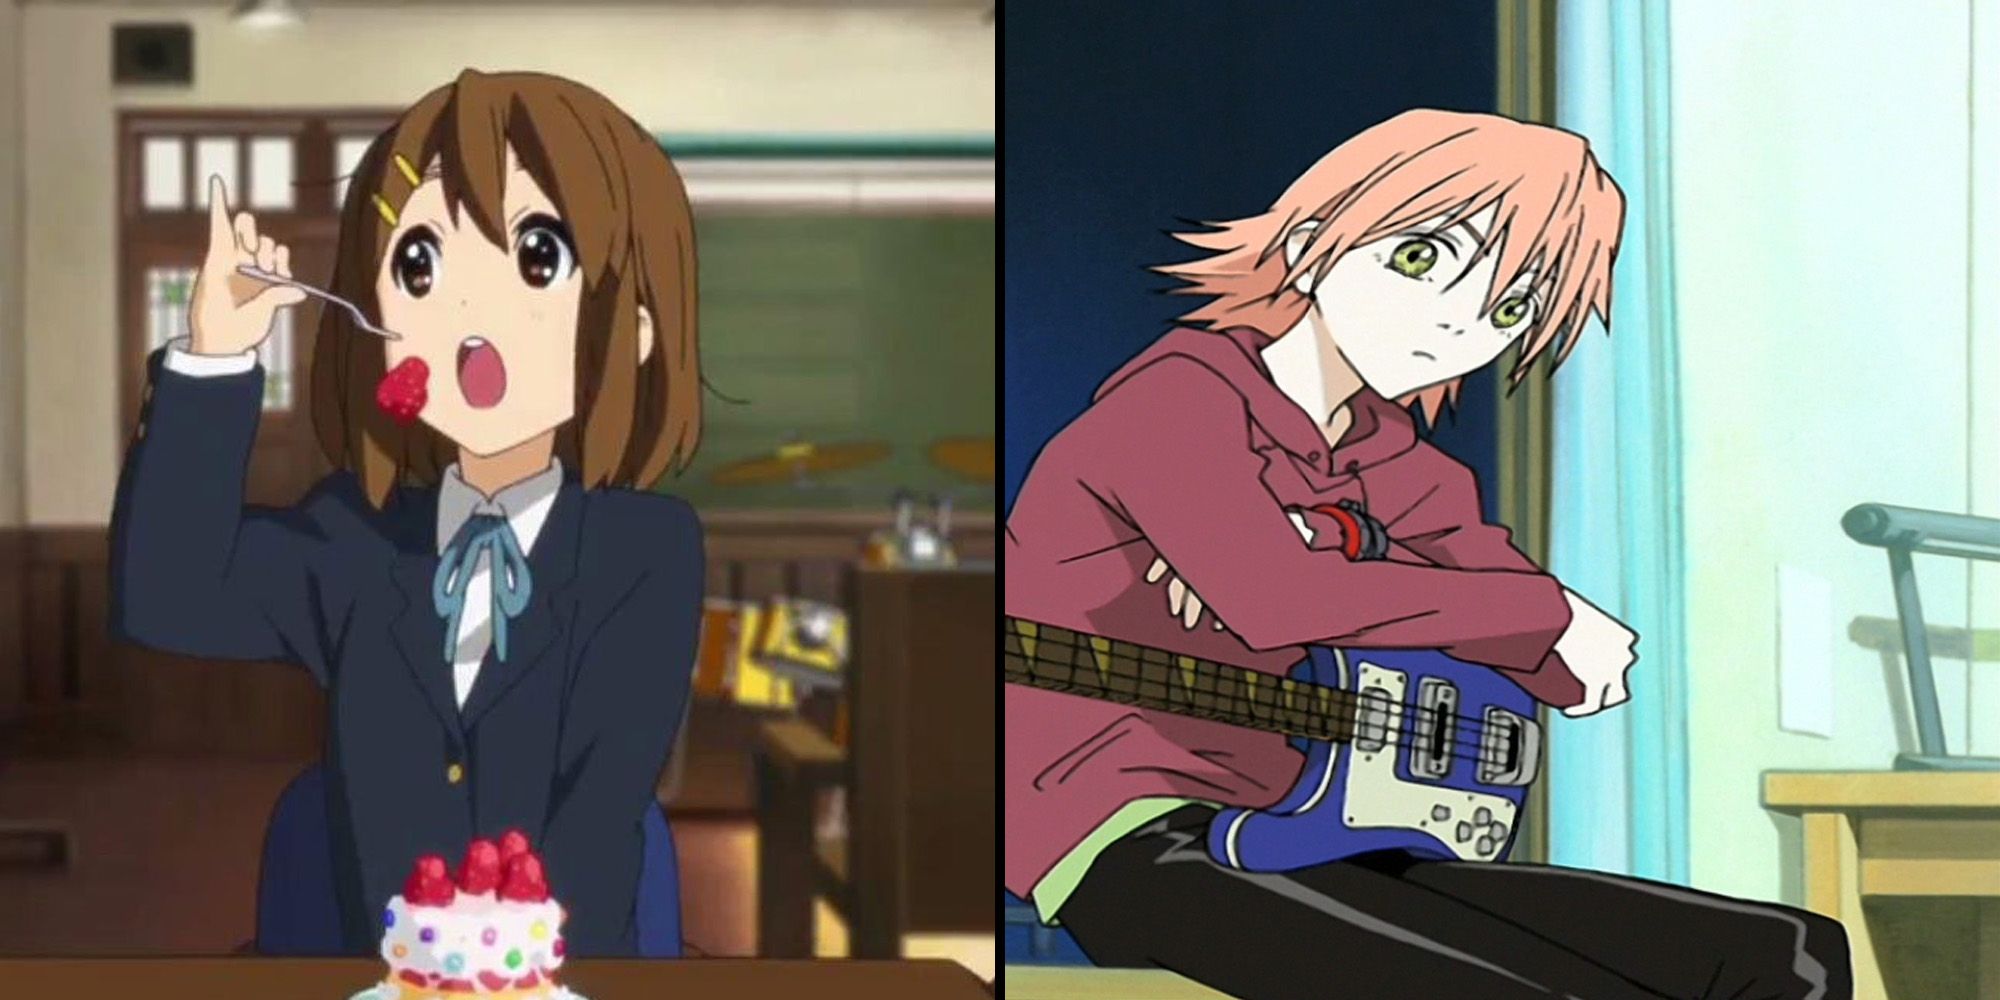 That moment when you get a guitar because of an anime boy : r/GivenAnime